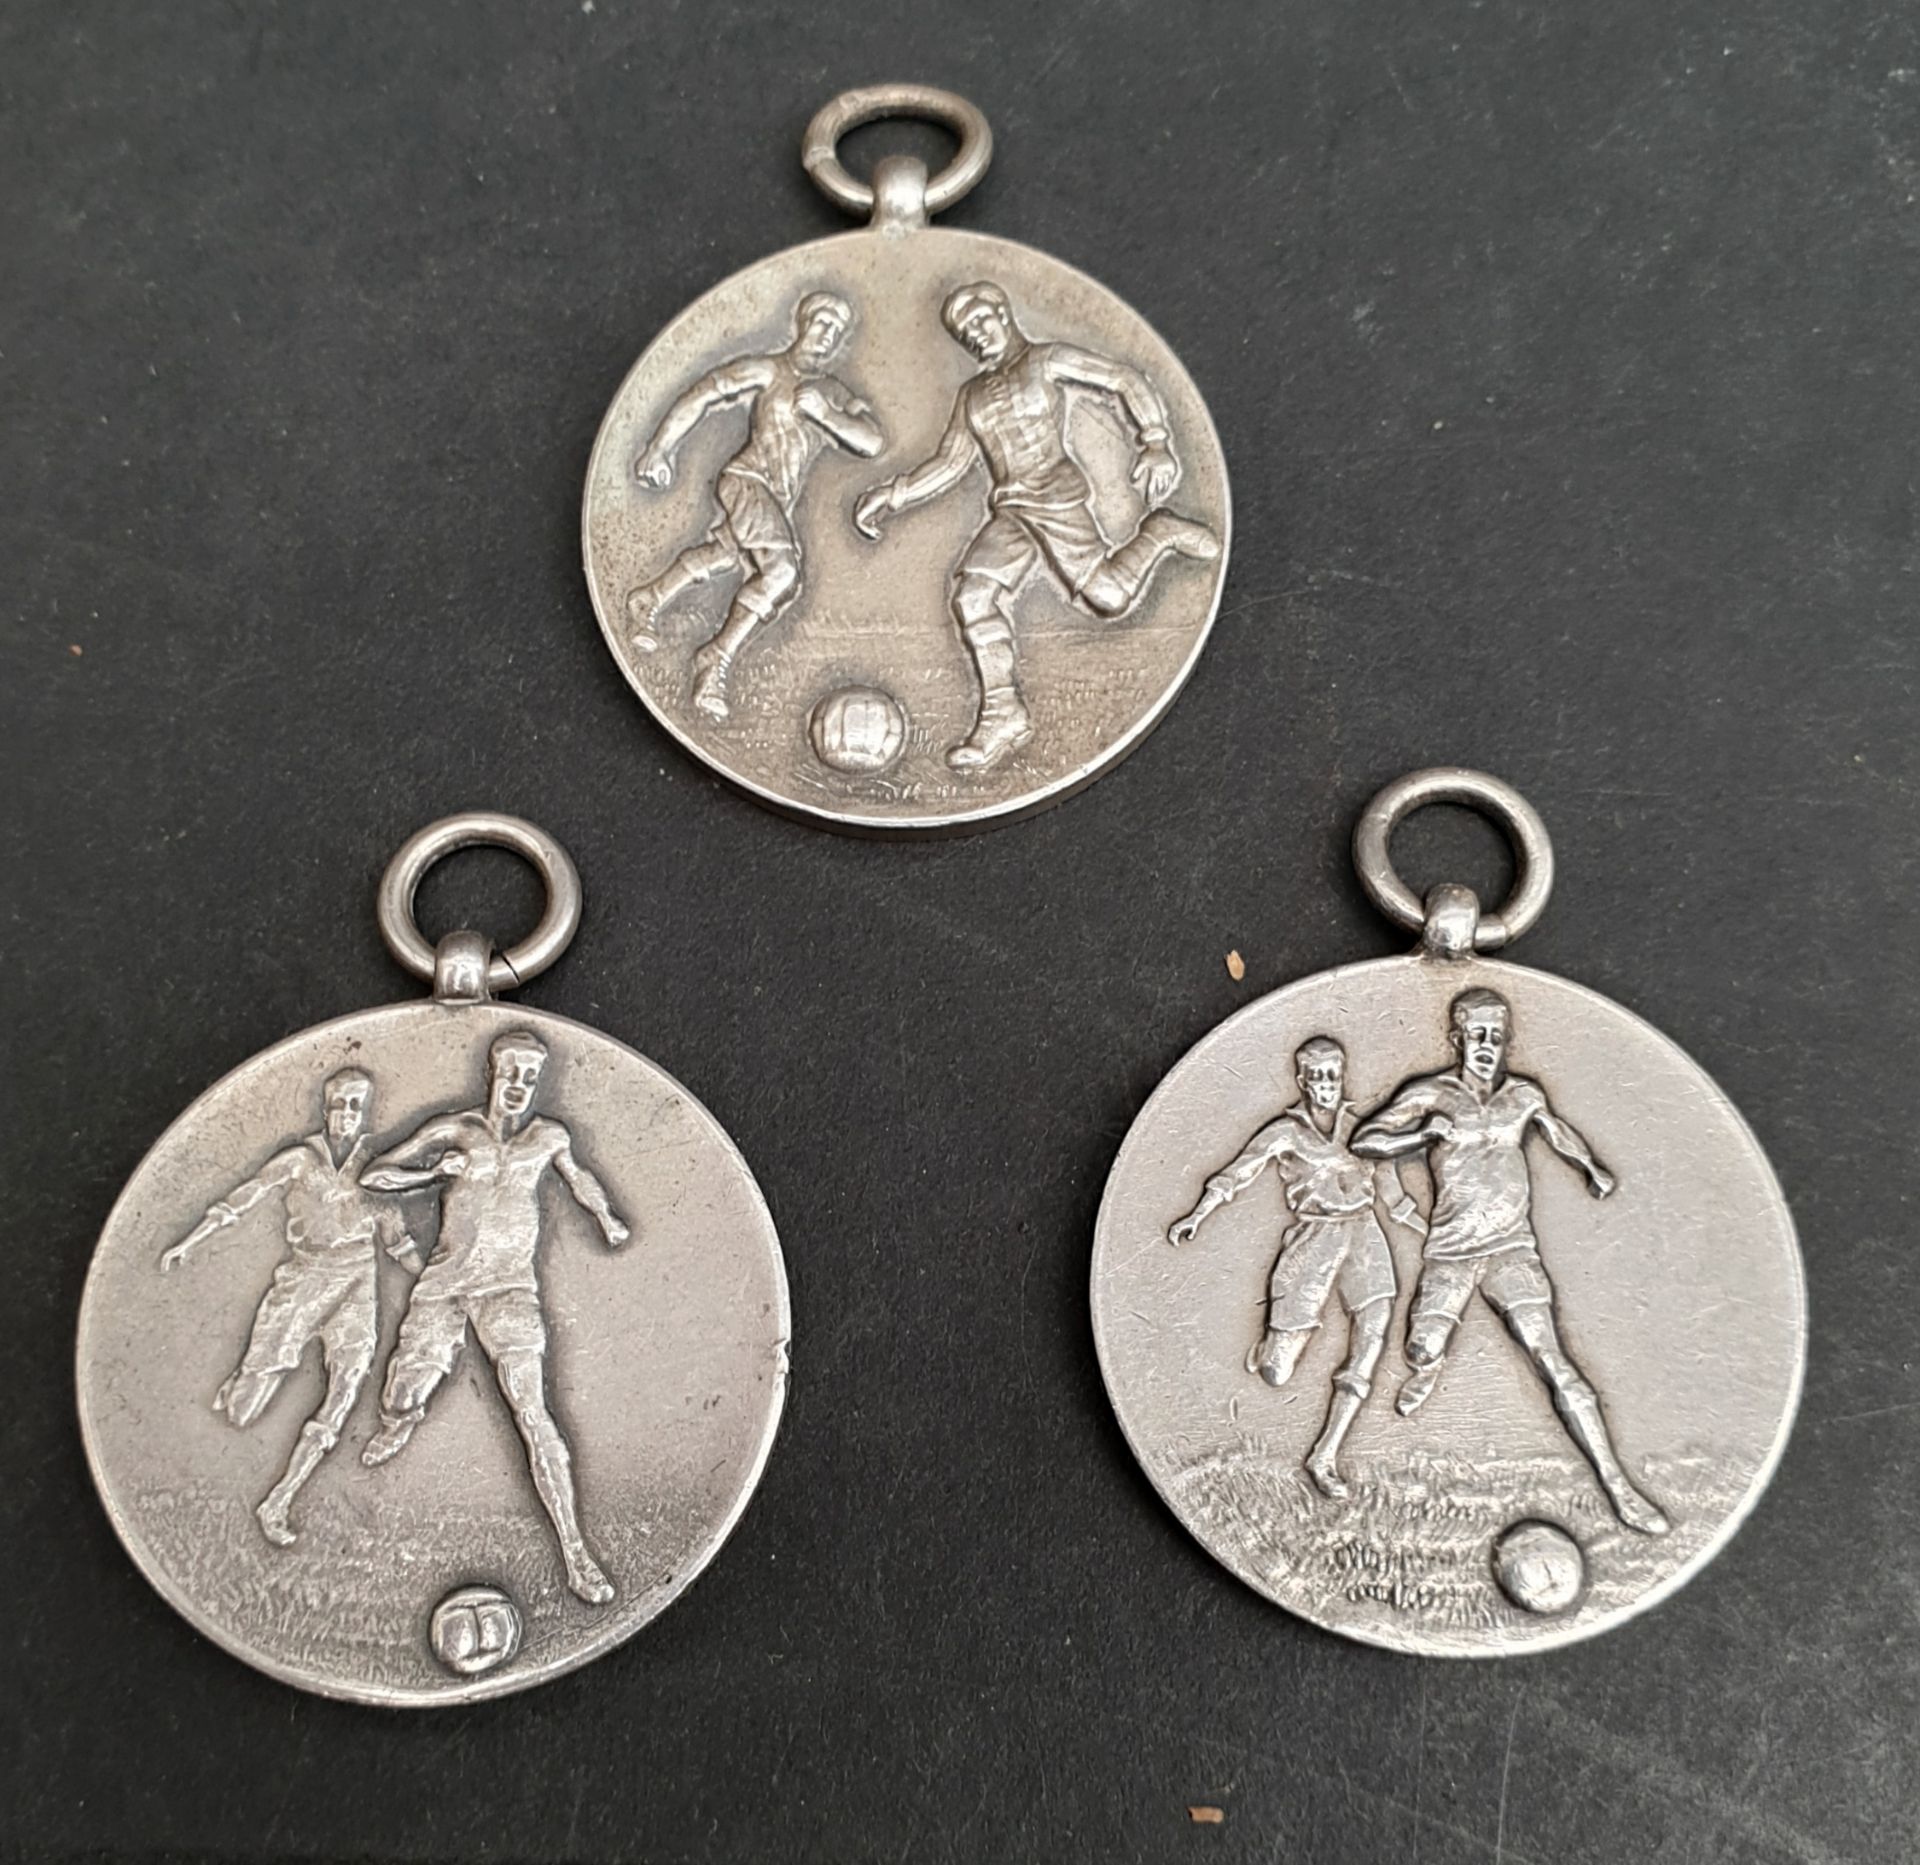 Antique 3 x Sterling Silver Navy Military Football Medals 1929 and 1930. HMS Hawkins Inter Part